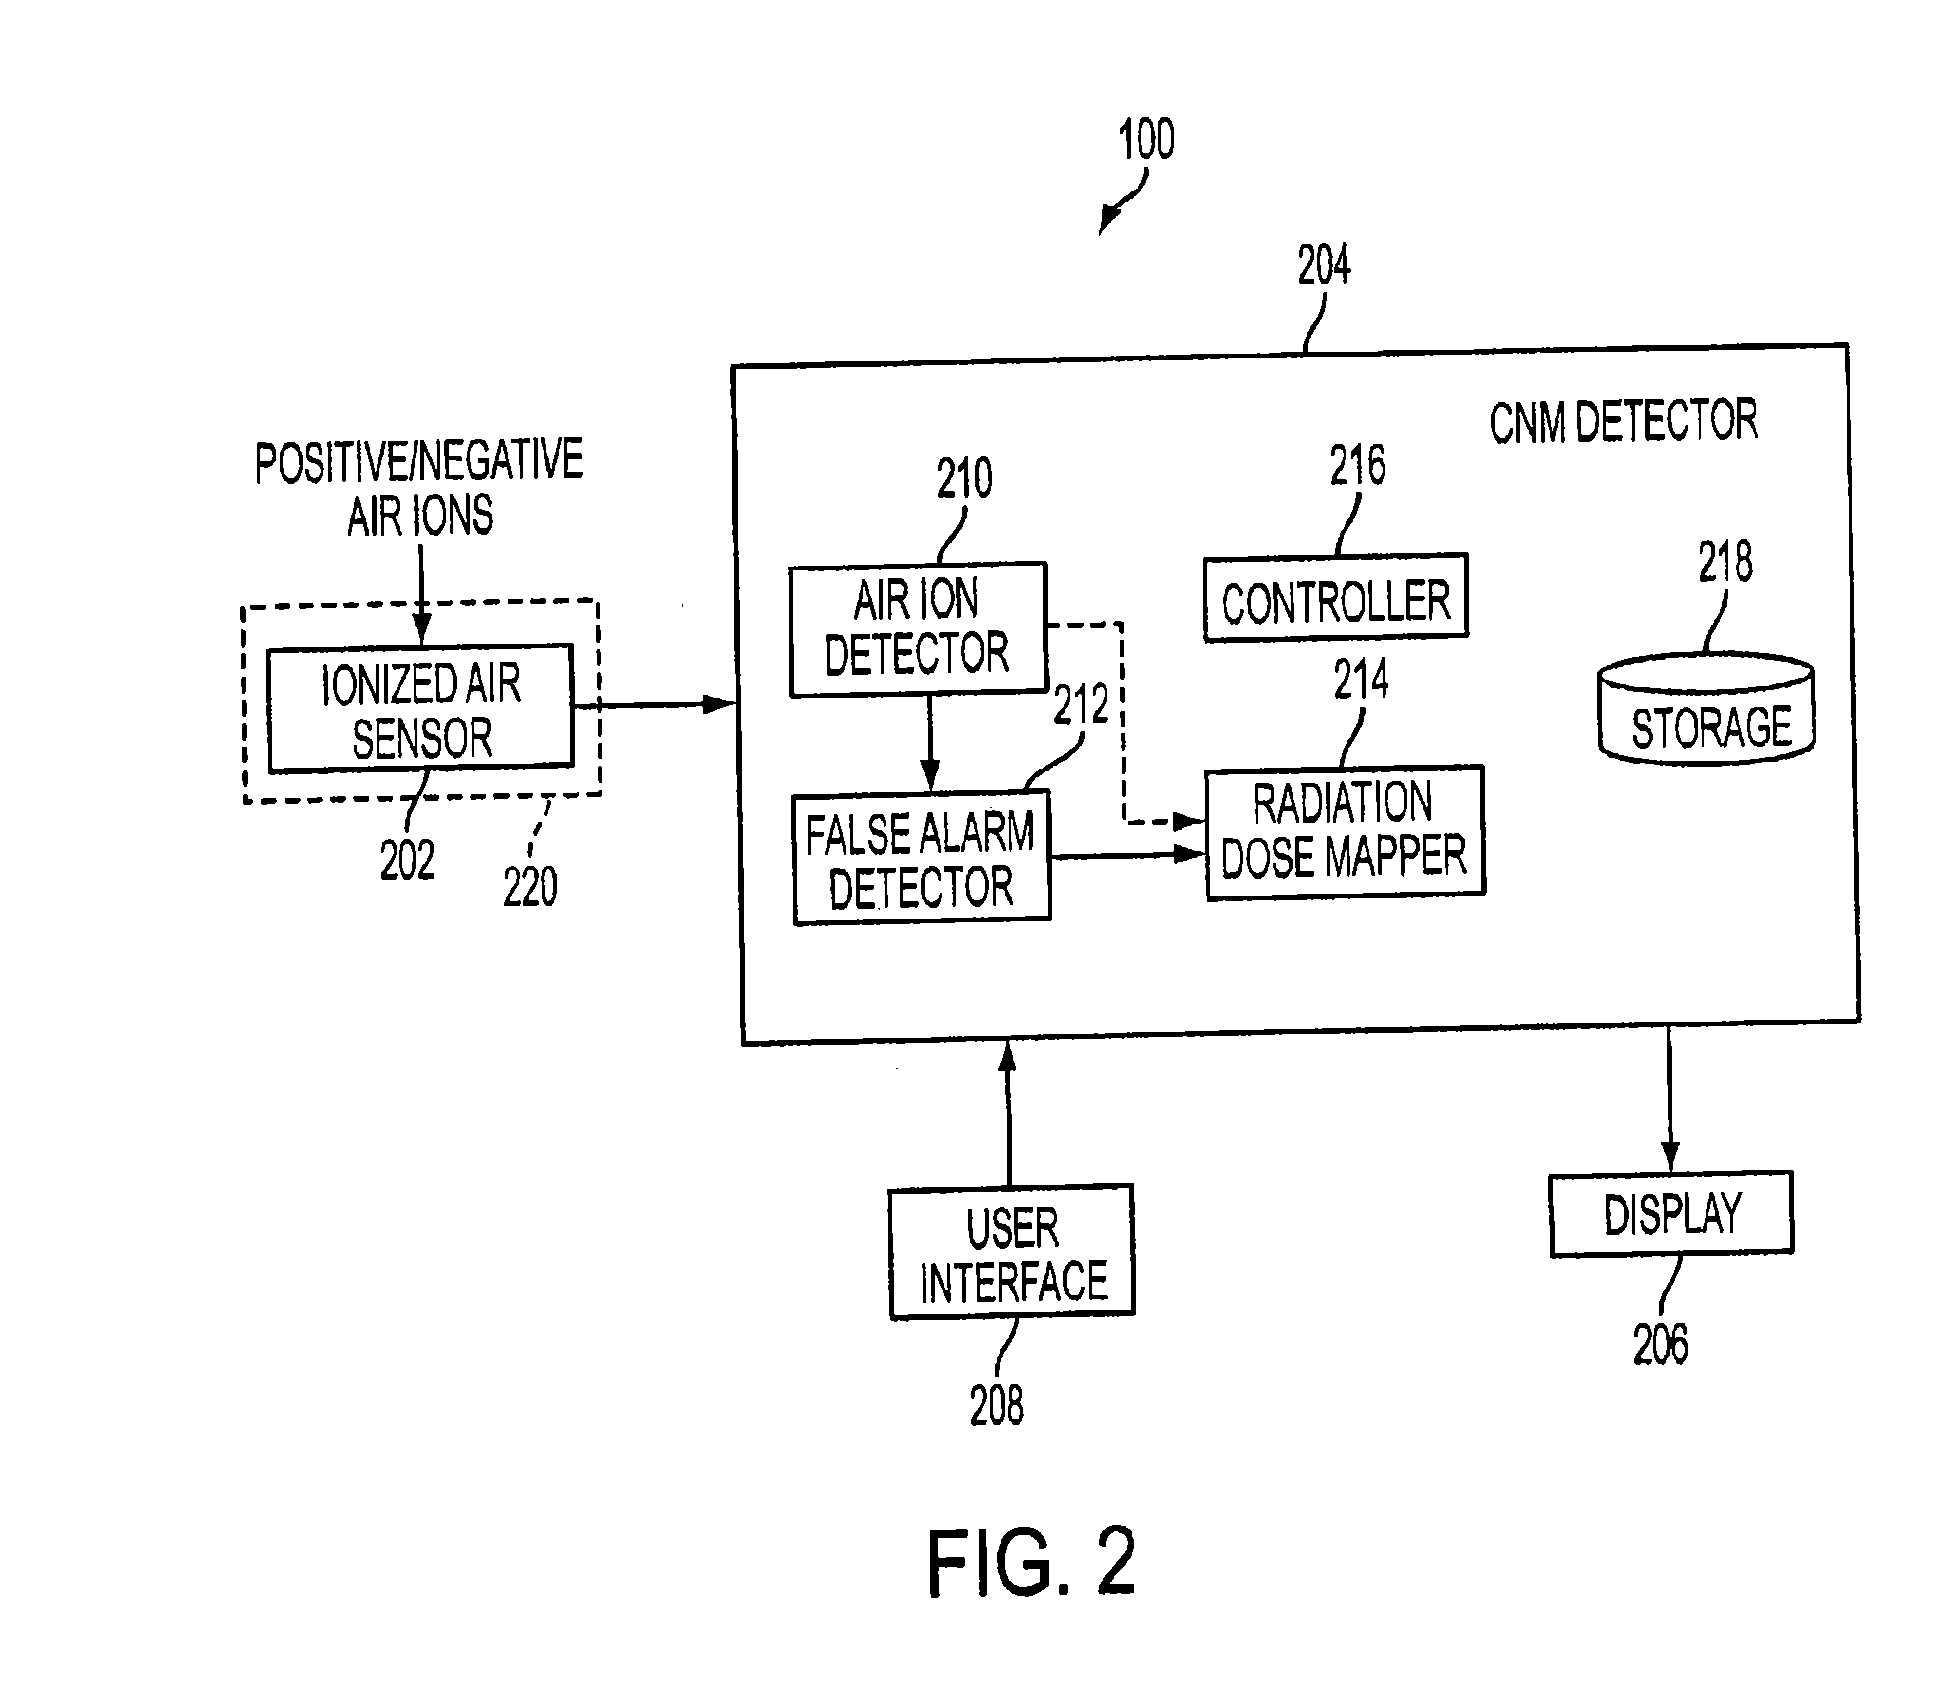 Systems and methods for detecting concealed nuclear material